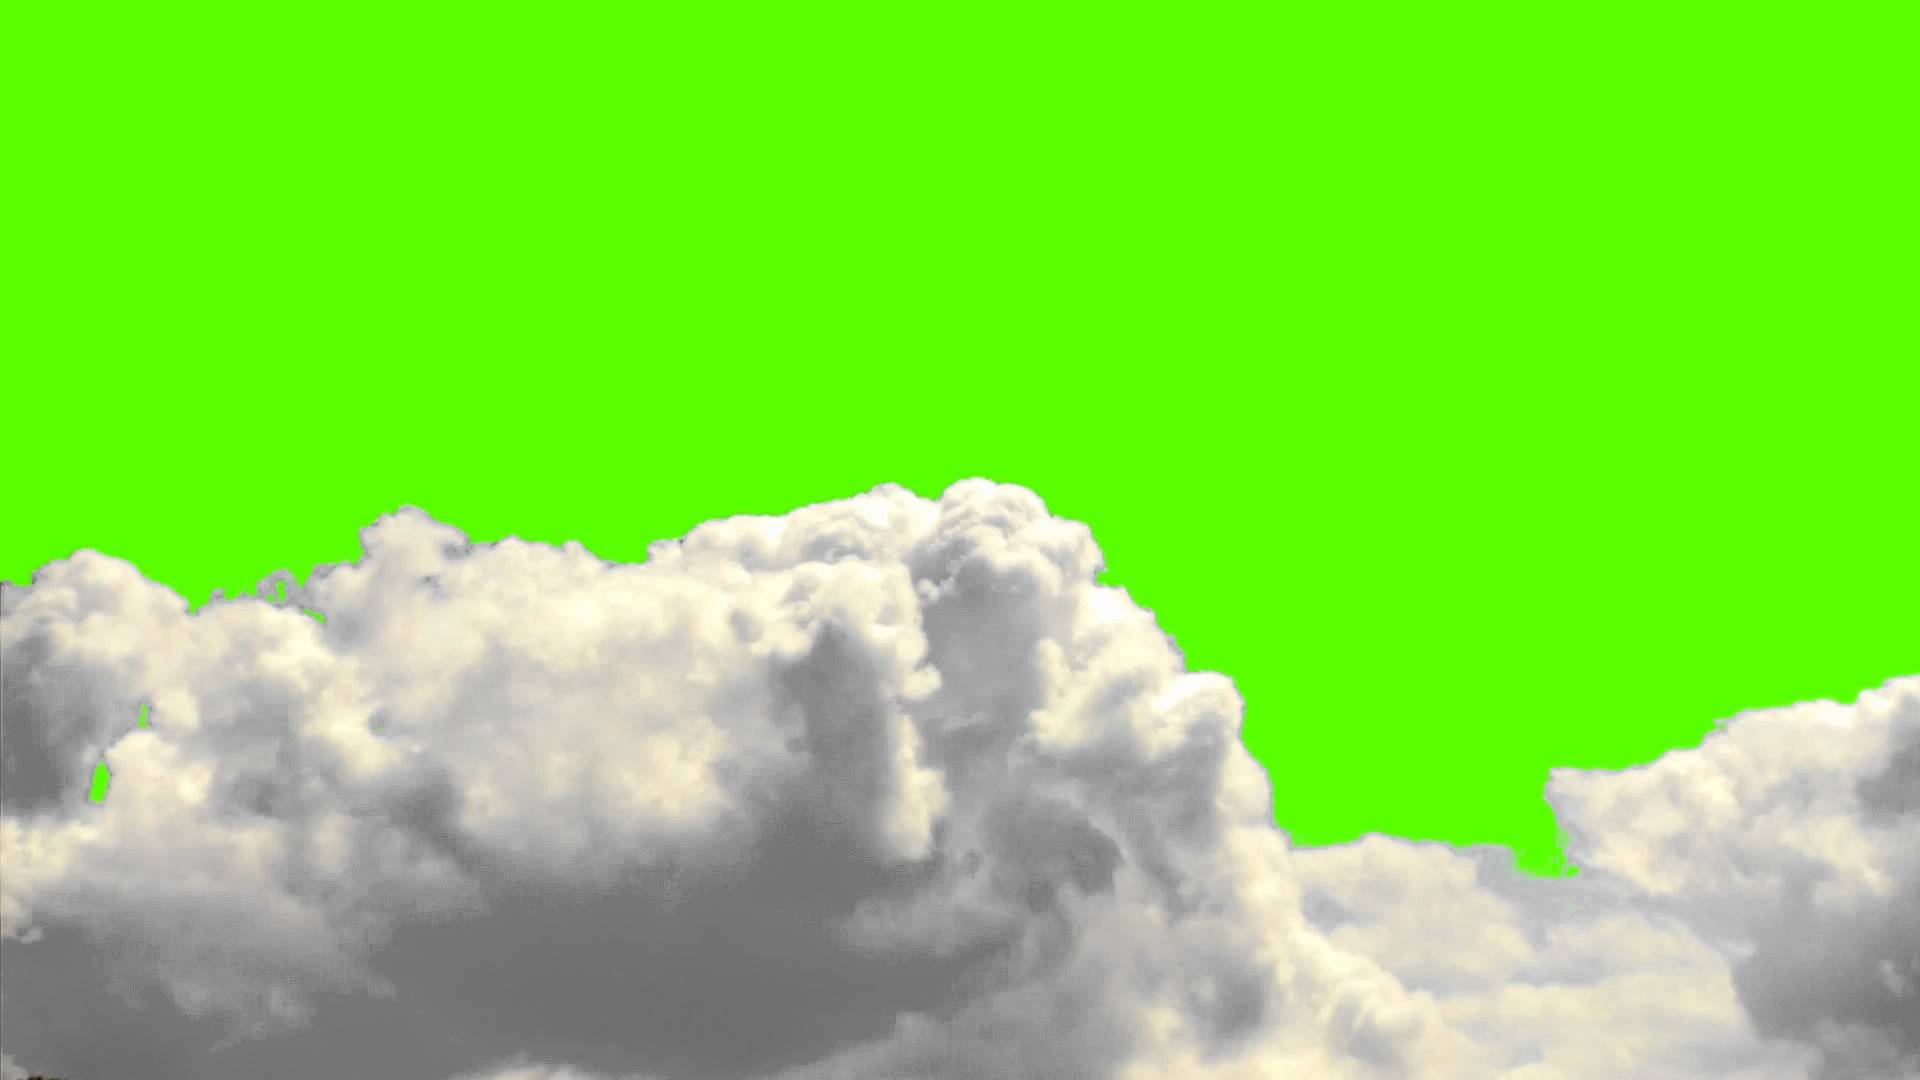 Real Clouds on a Green Screen Background Royalty Stock